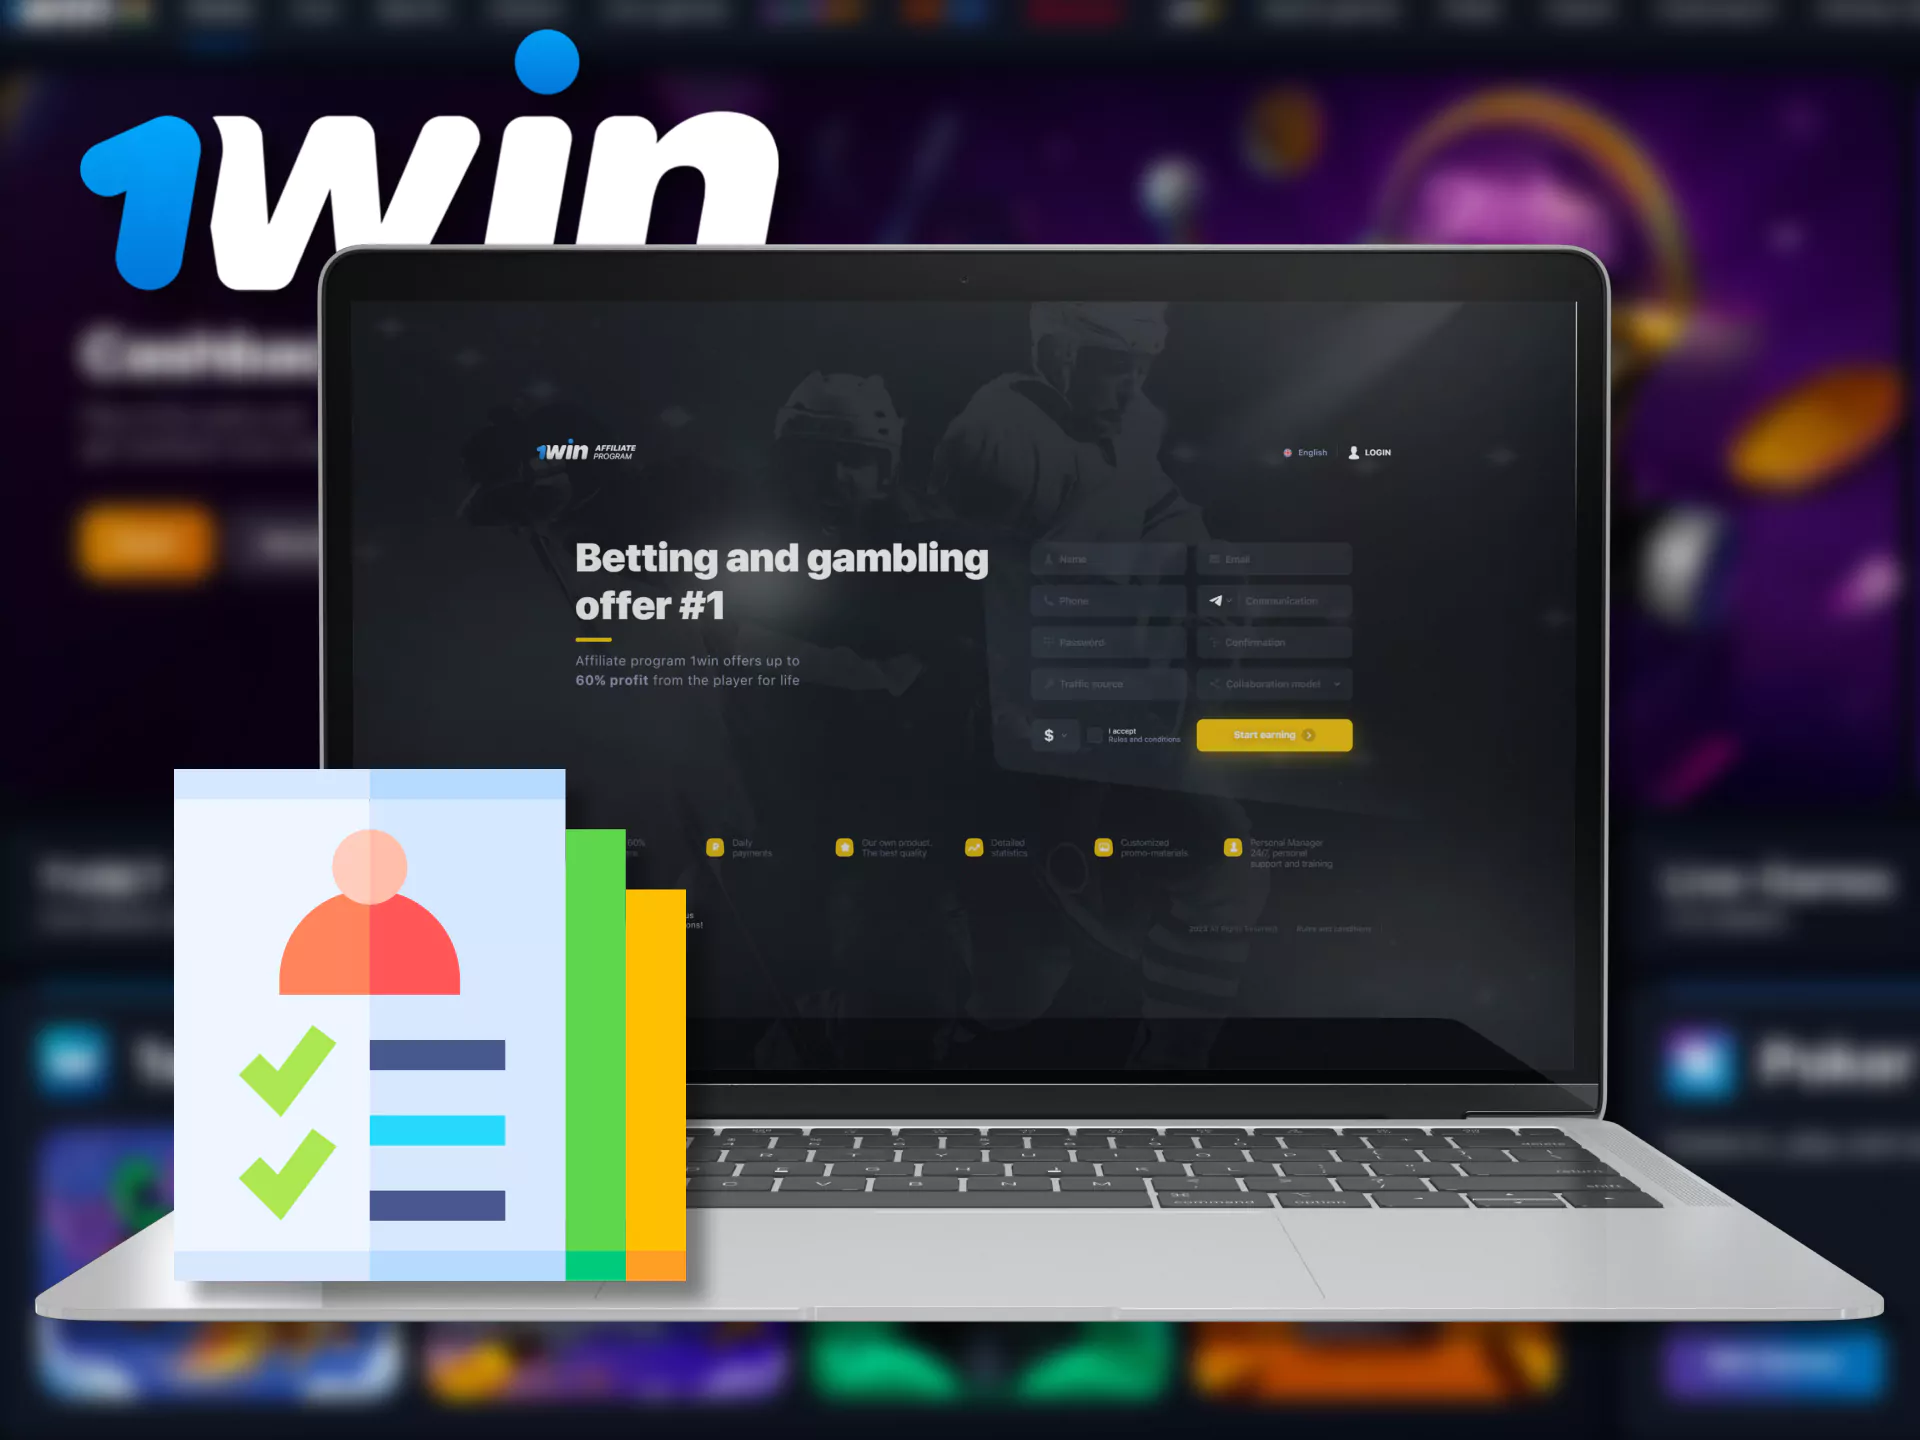 To become part of the 1Win affiliate program, go through a simple registration.